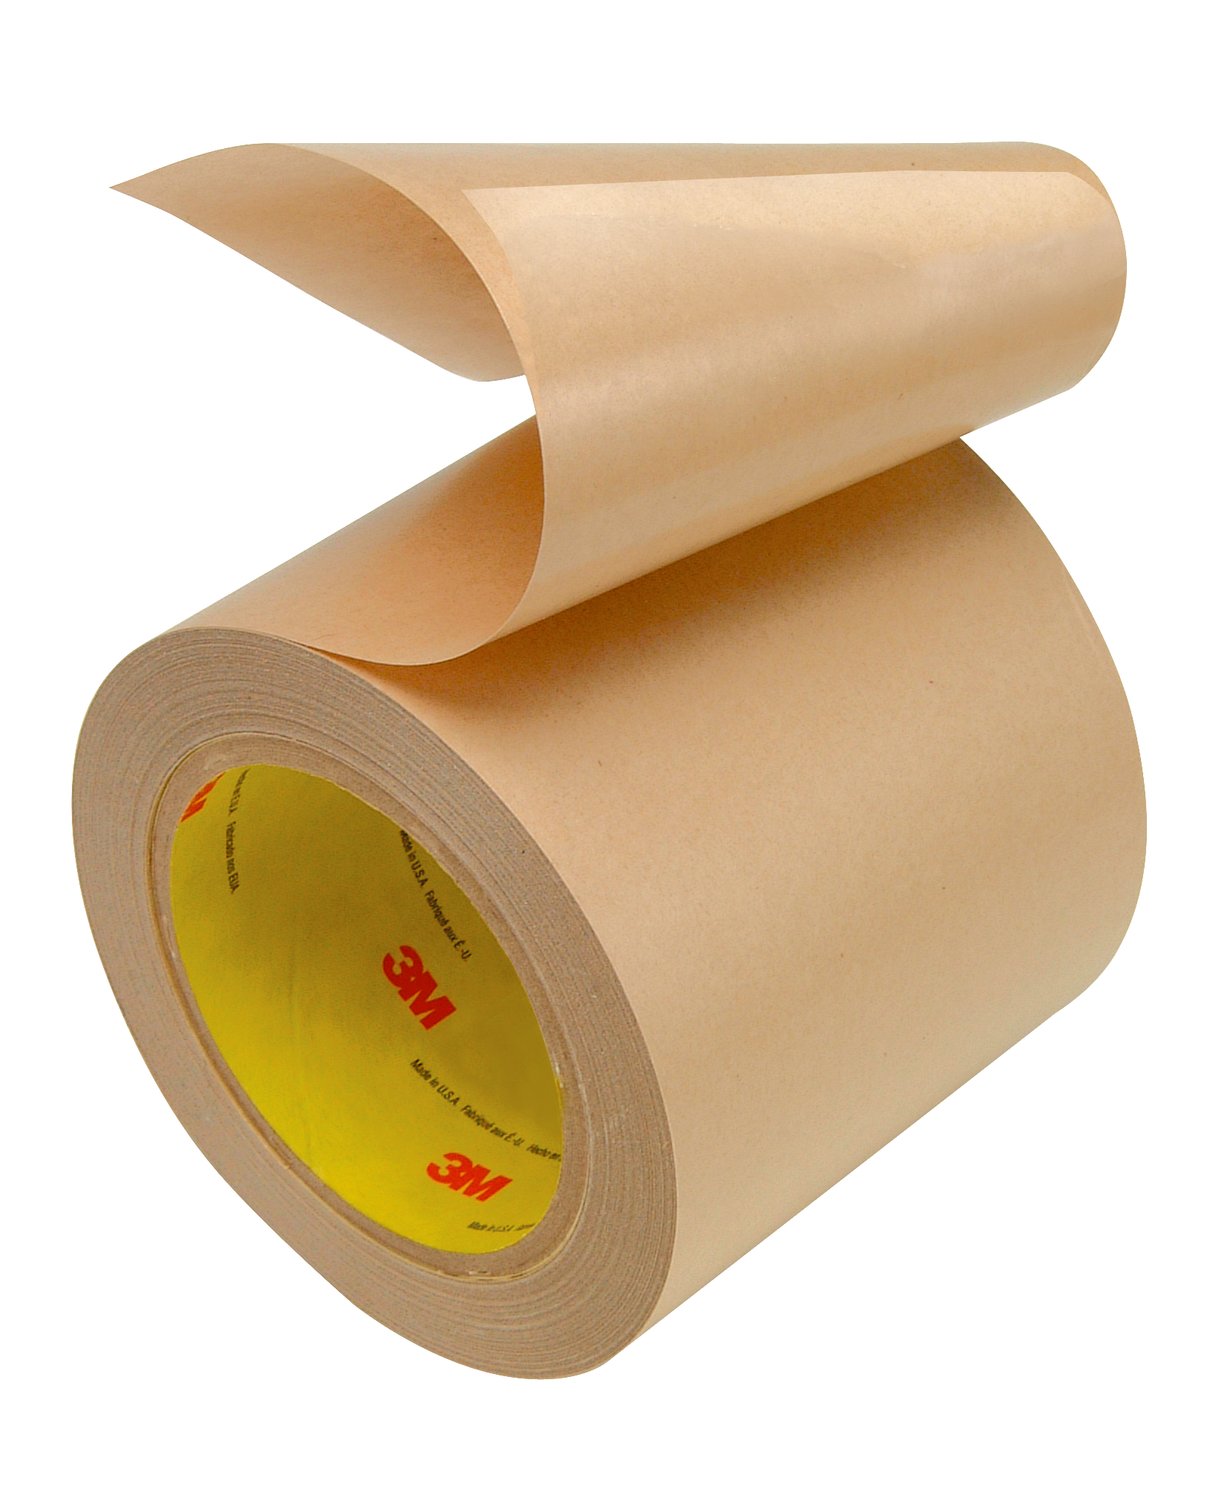 7010334603 - 3M Electrically Conductive Adhesive Transfer Tape 9703, 4-1/2 in x 36
yds, 1/Inner, 2 per case Bulk